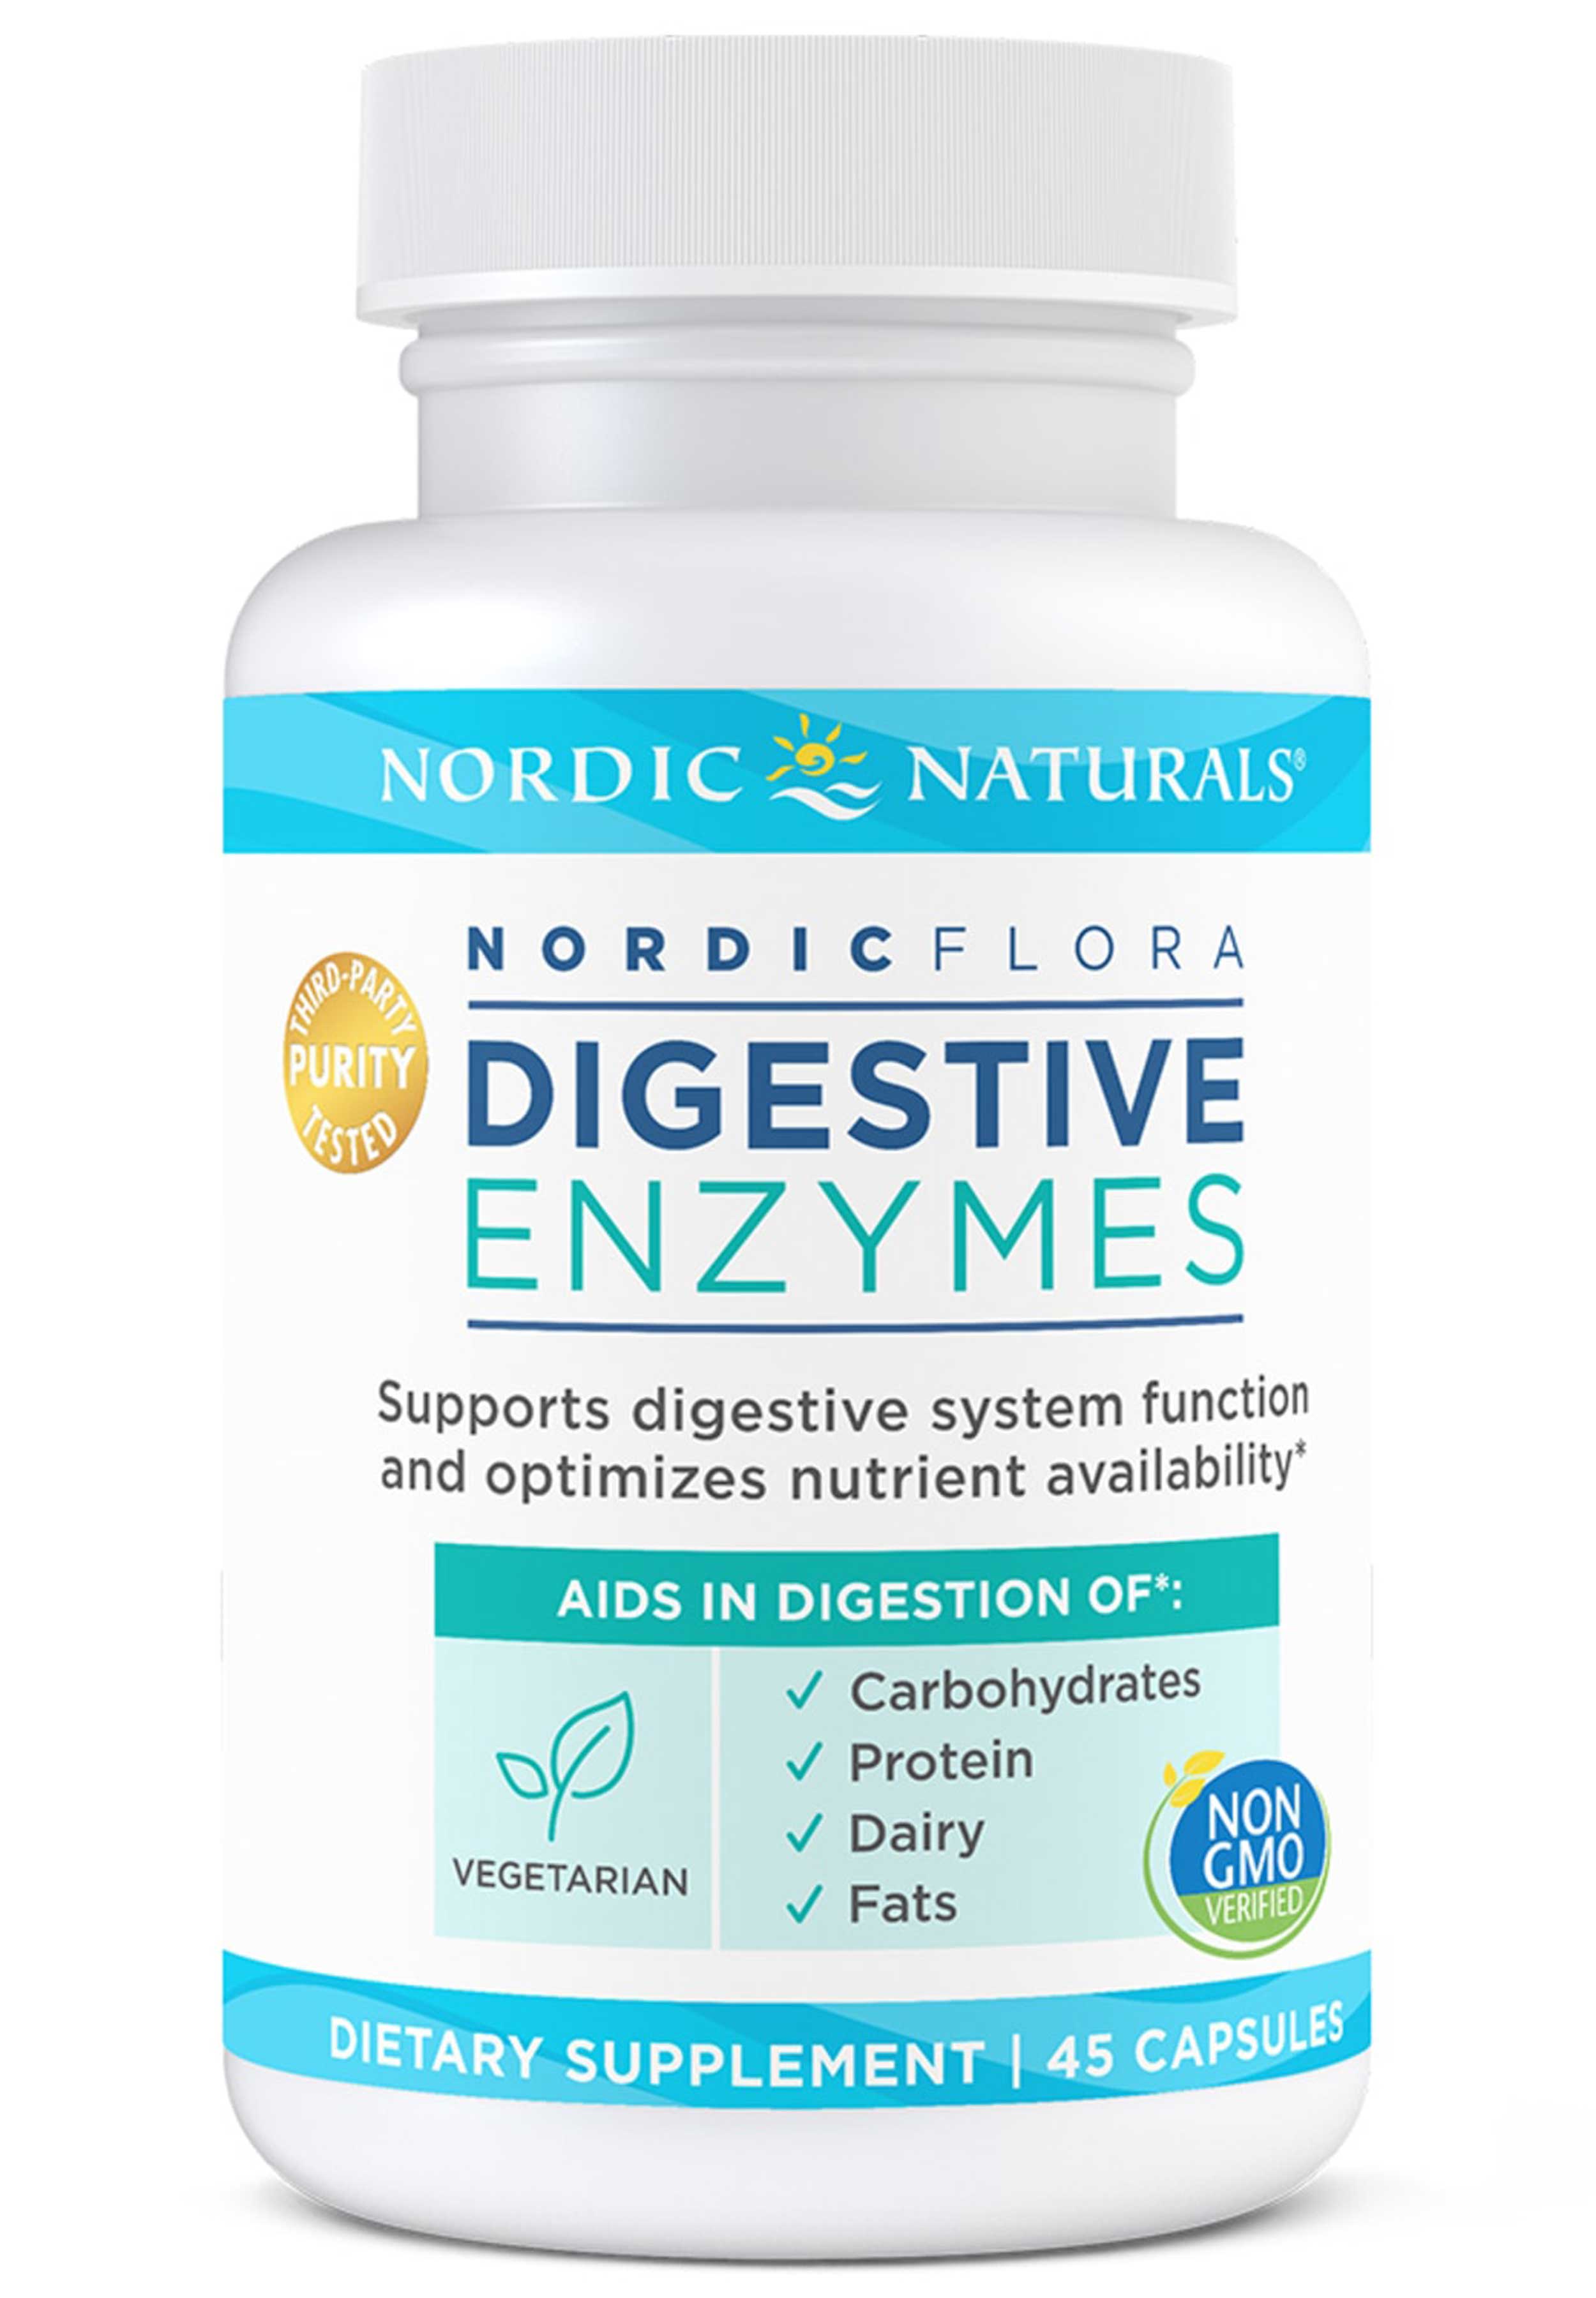 Nordic Naturals Nordic Flora Digestive Enzymes